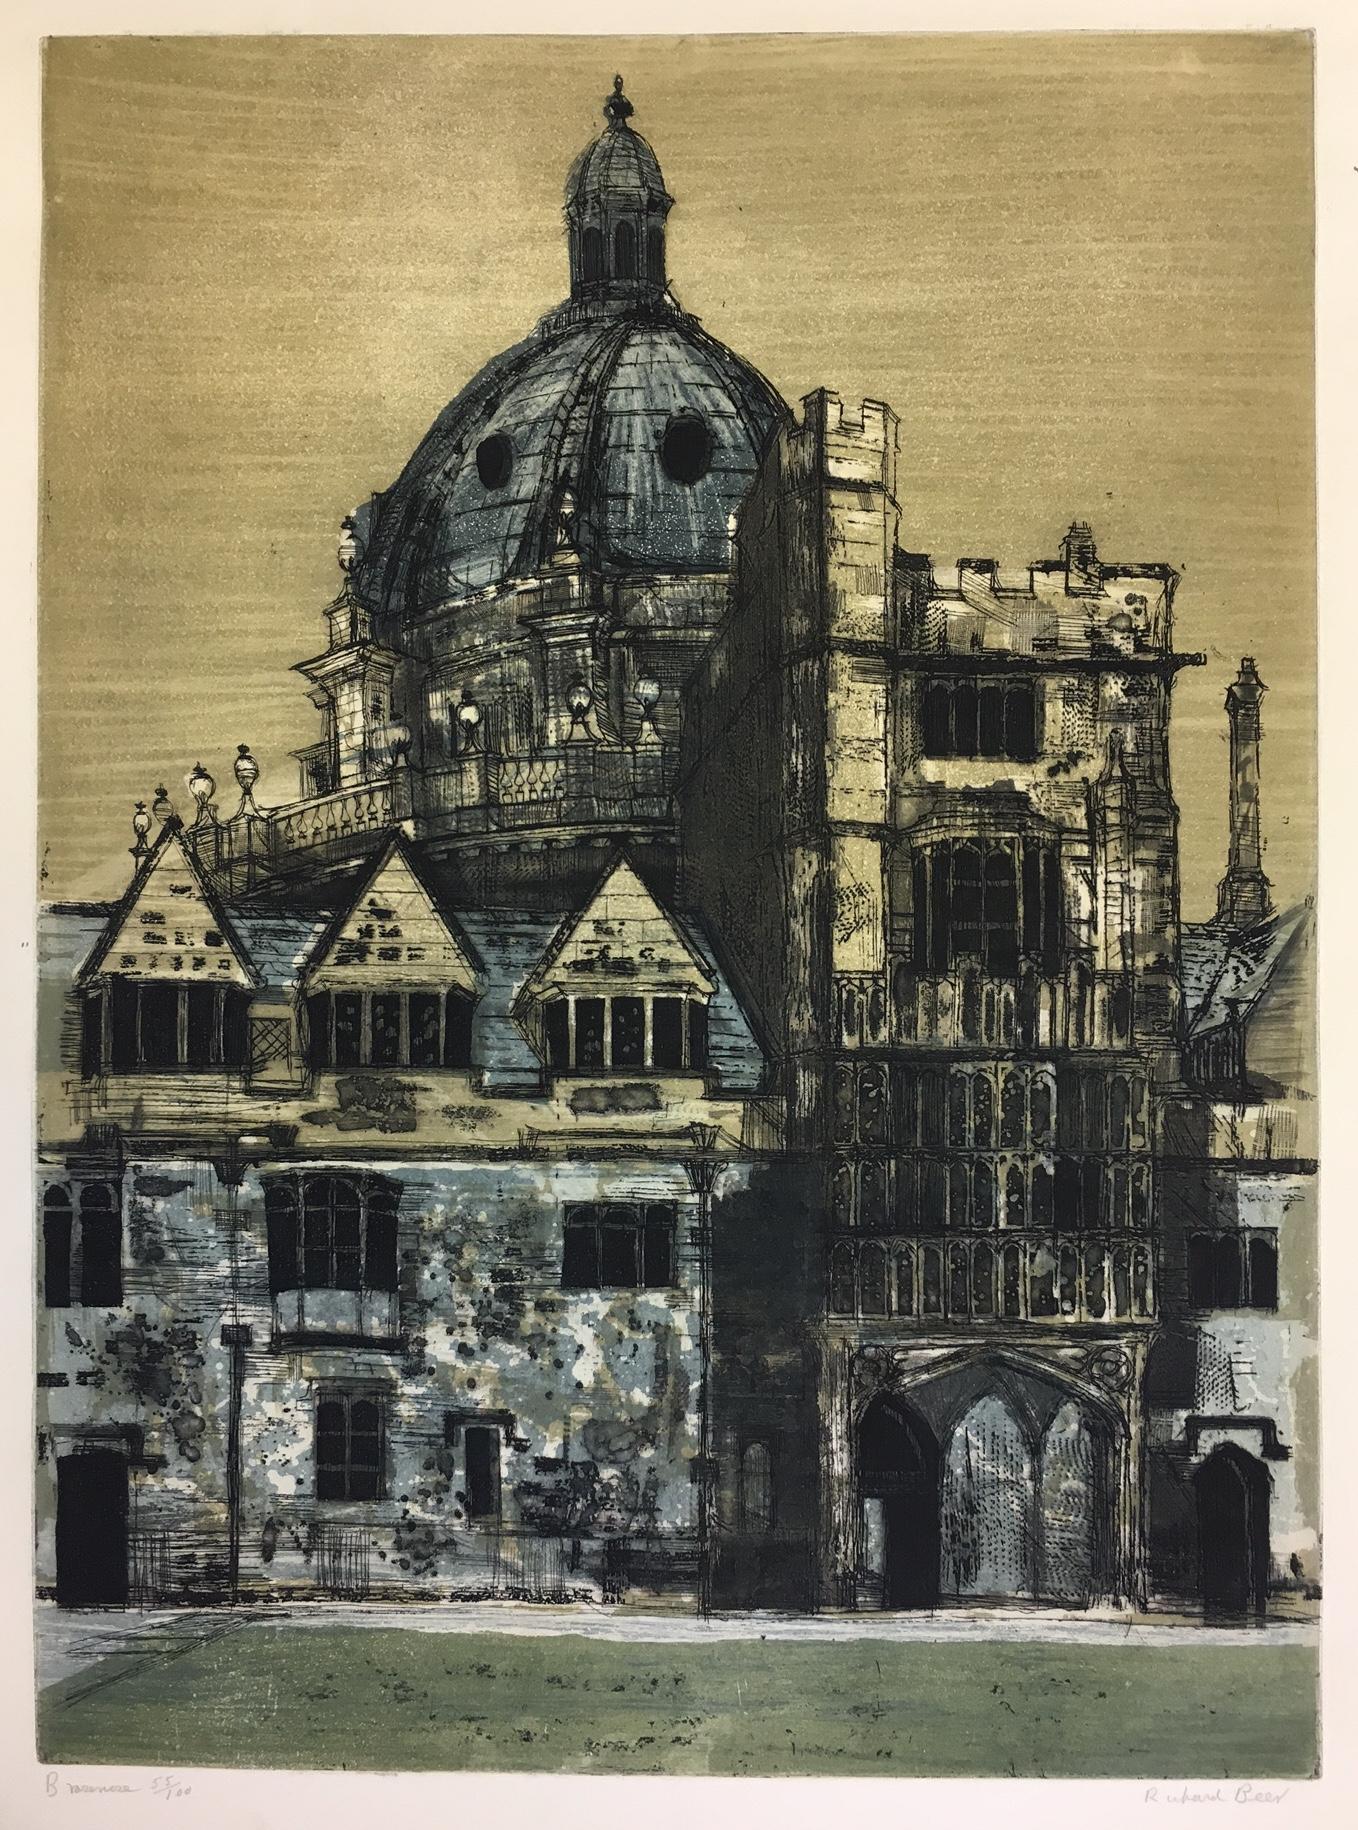 To see our other views of Oxford and Cambridge, or Modern British Art, scroll down to "More from this Seller" and below it click on "See all from this Seller" - or send us a message if you cannot find the artist you want.

Richard Beer (1928 -